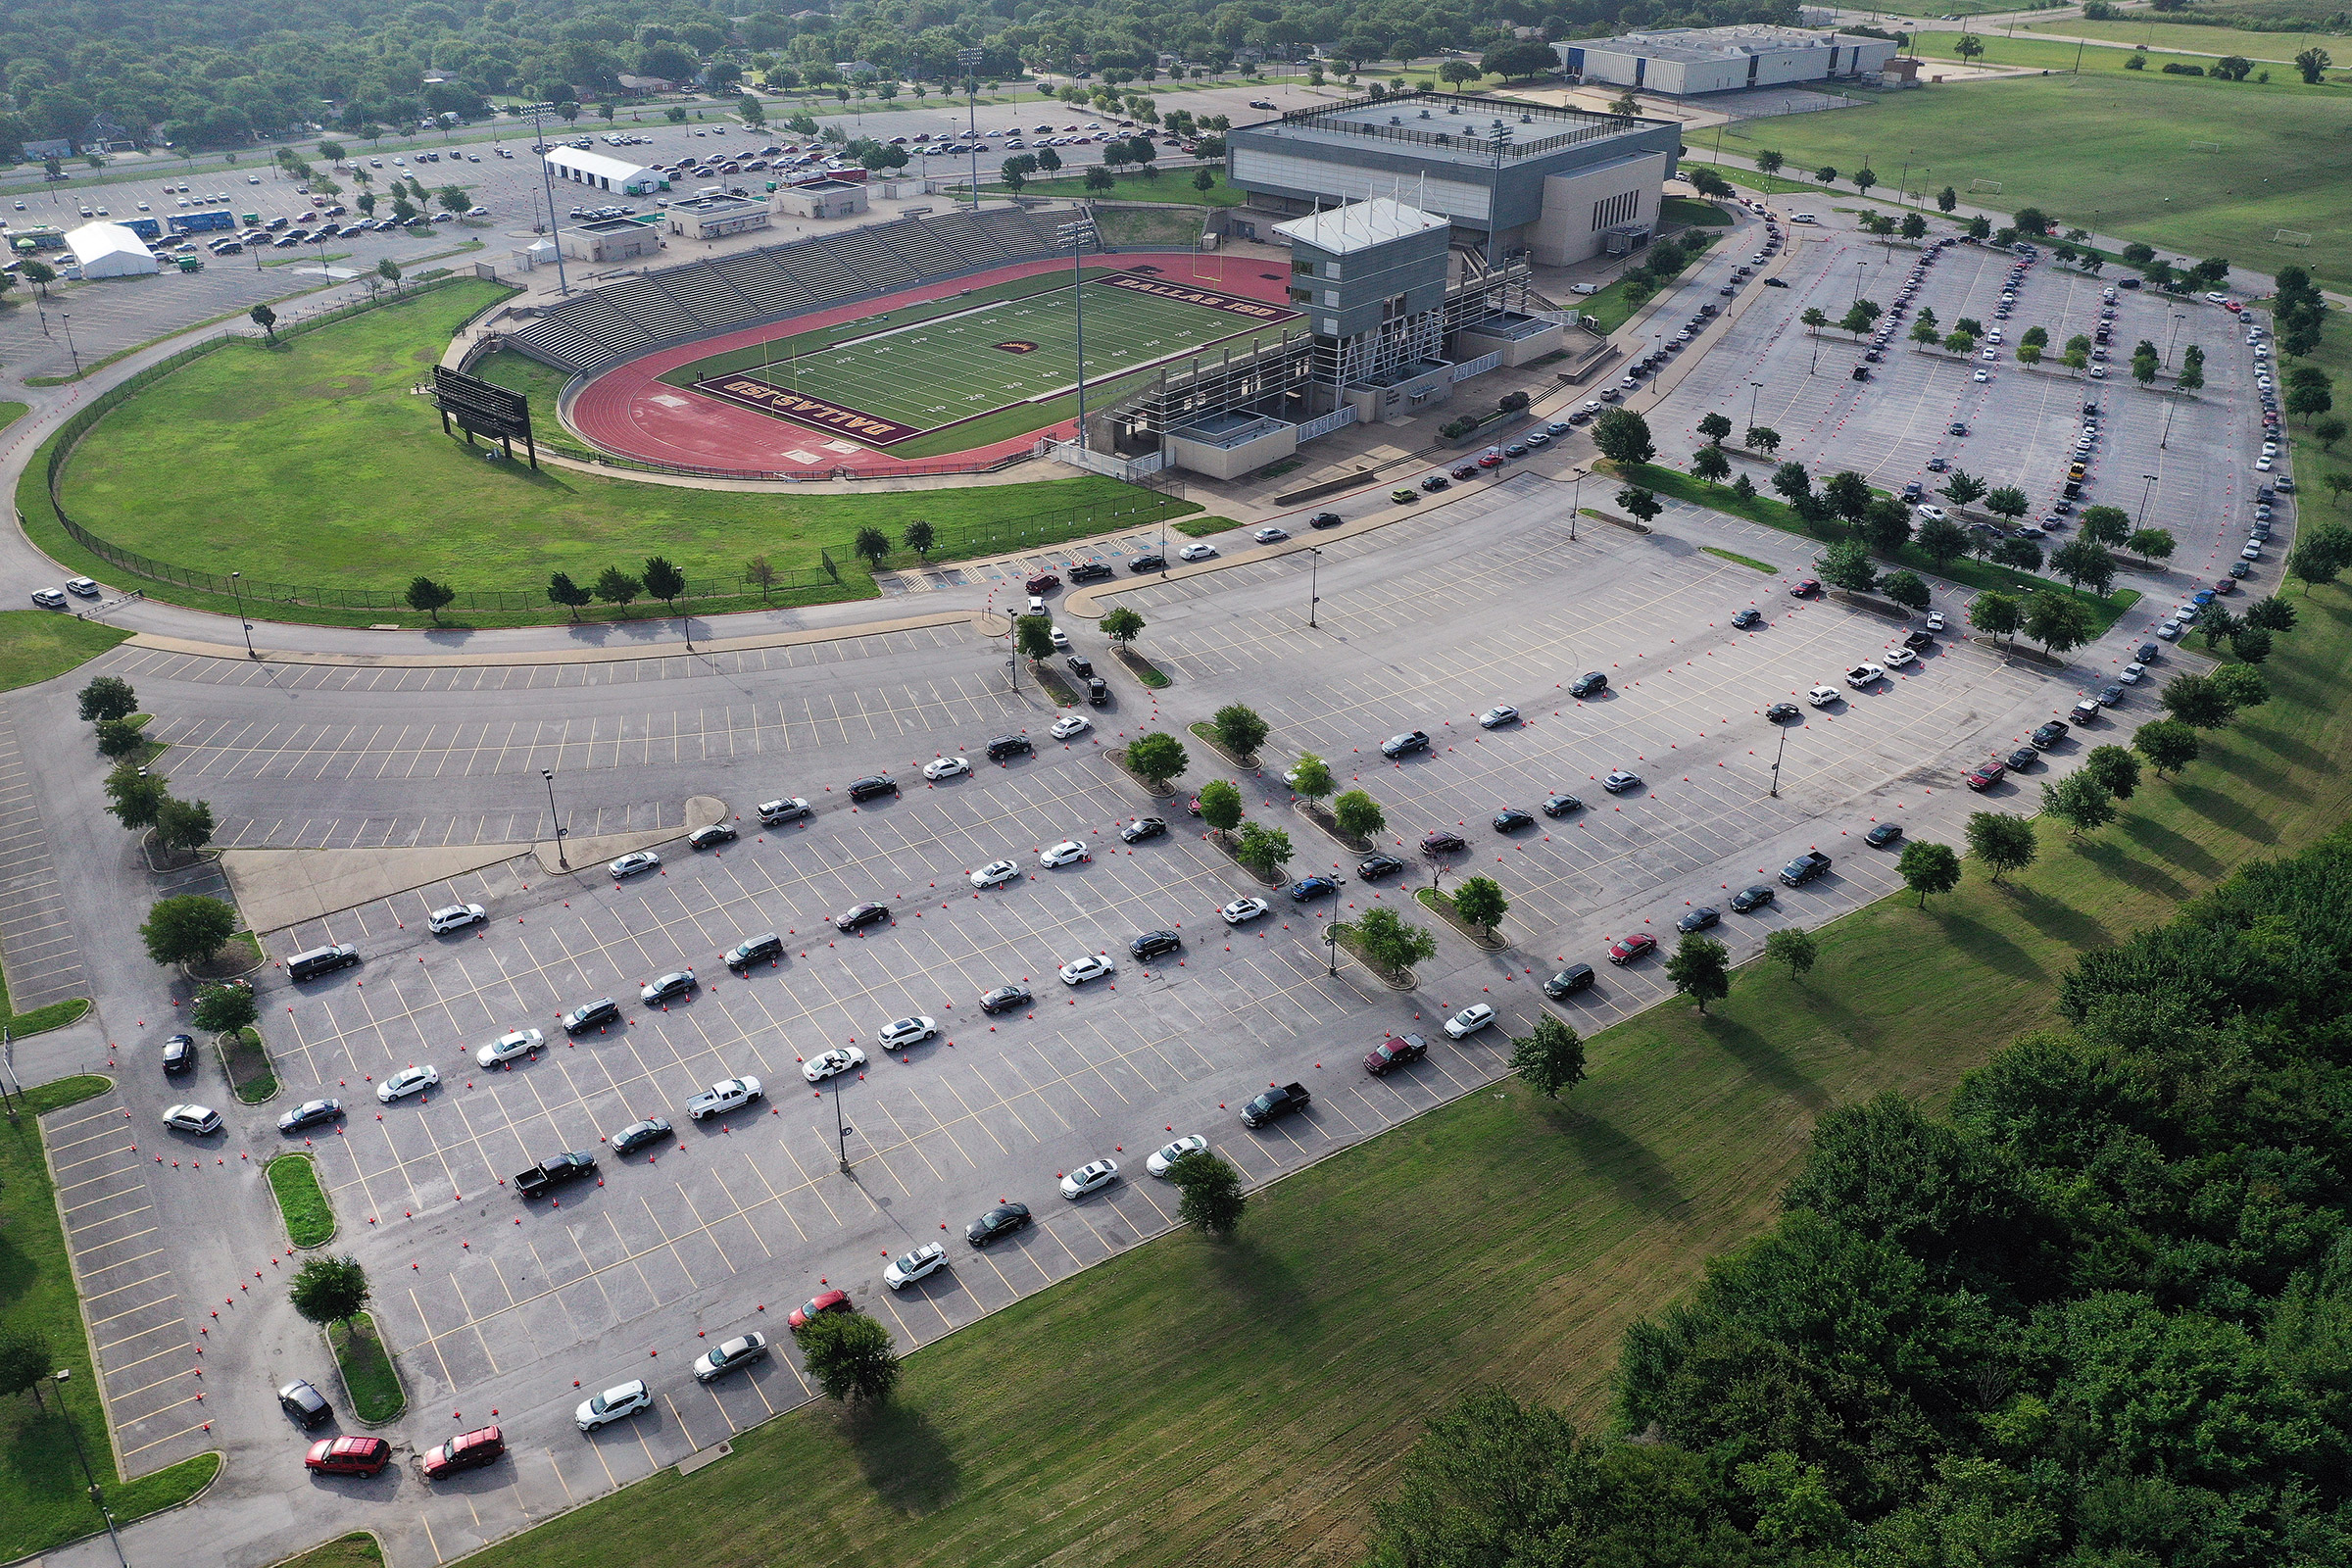 An aerial view from a drone as residents wait in line for the drive-thru COVID-19 testing center at the Ellis Davis Field House on July 2 in Dallas (Tom Pennington—Getty Images)